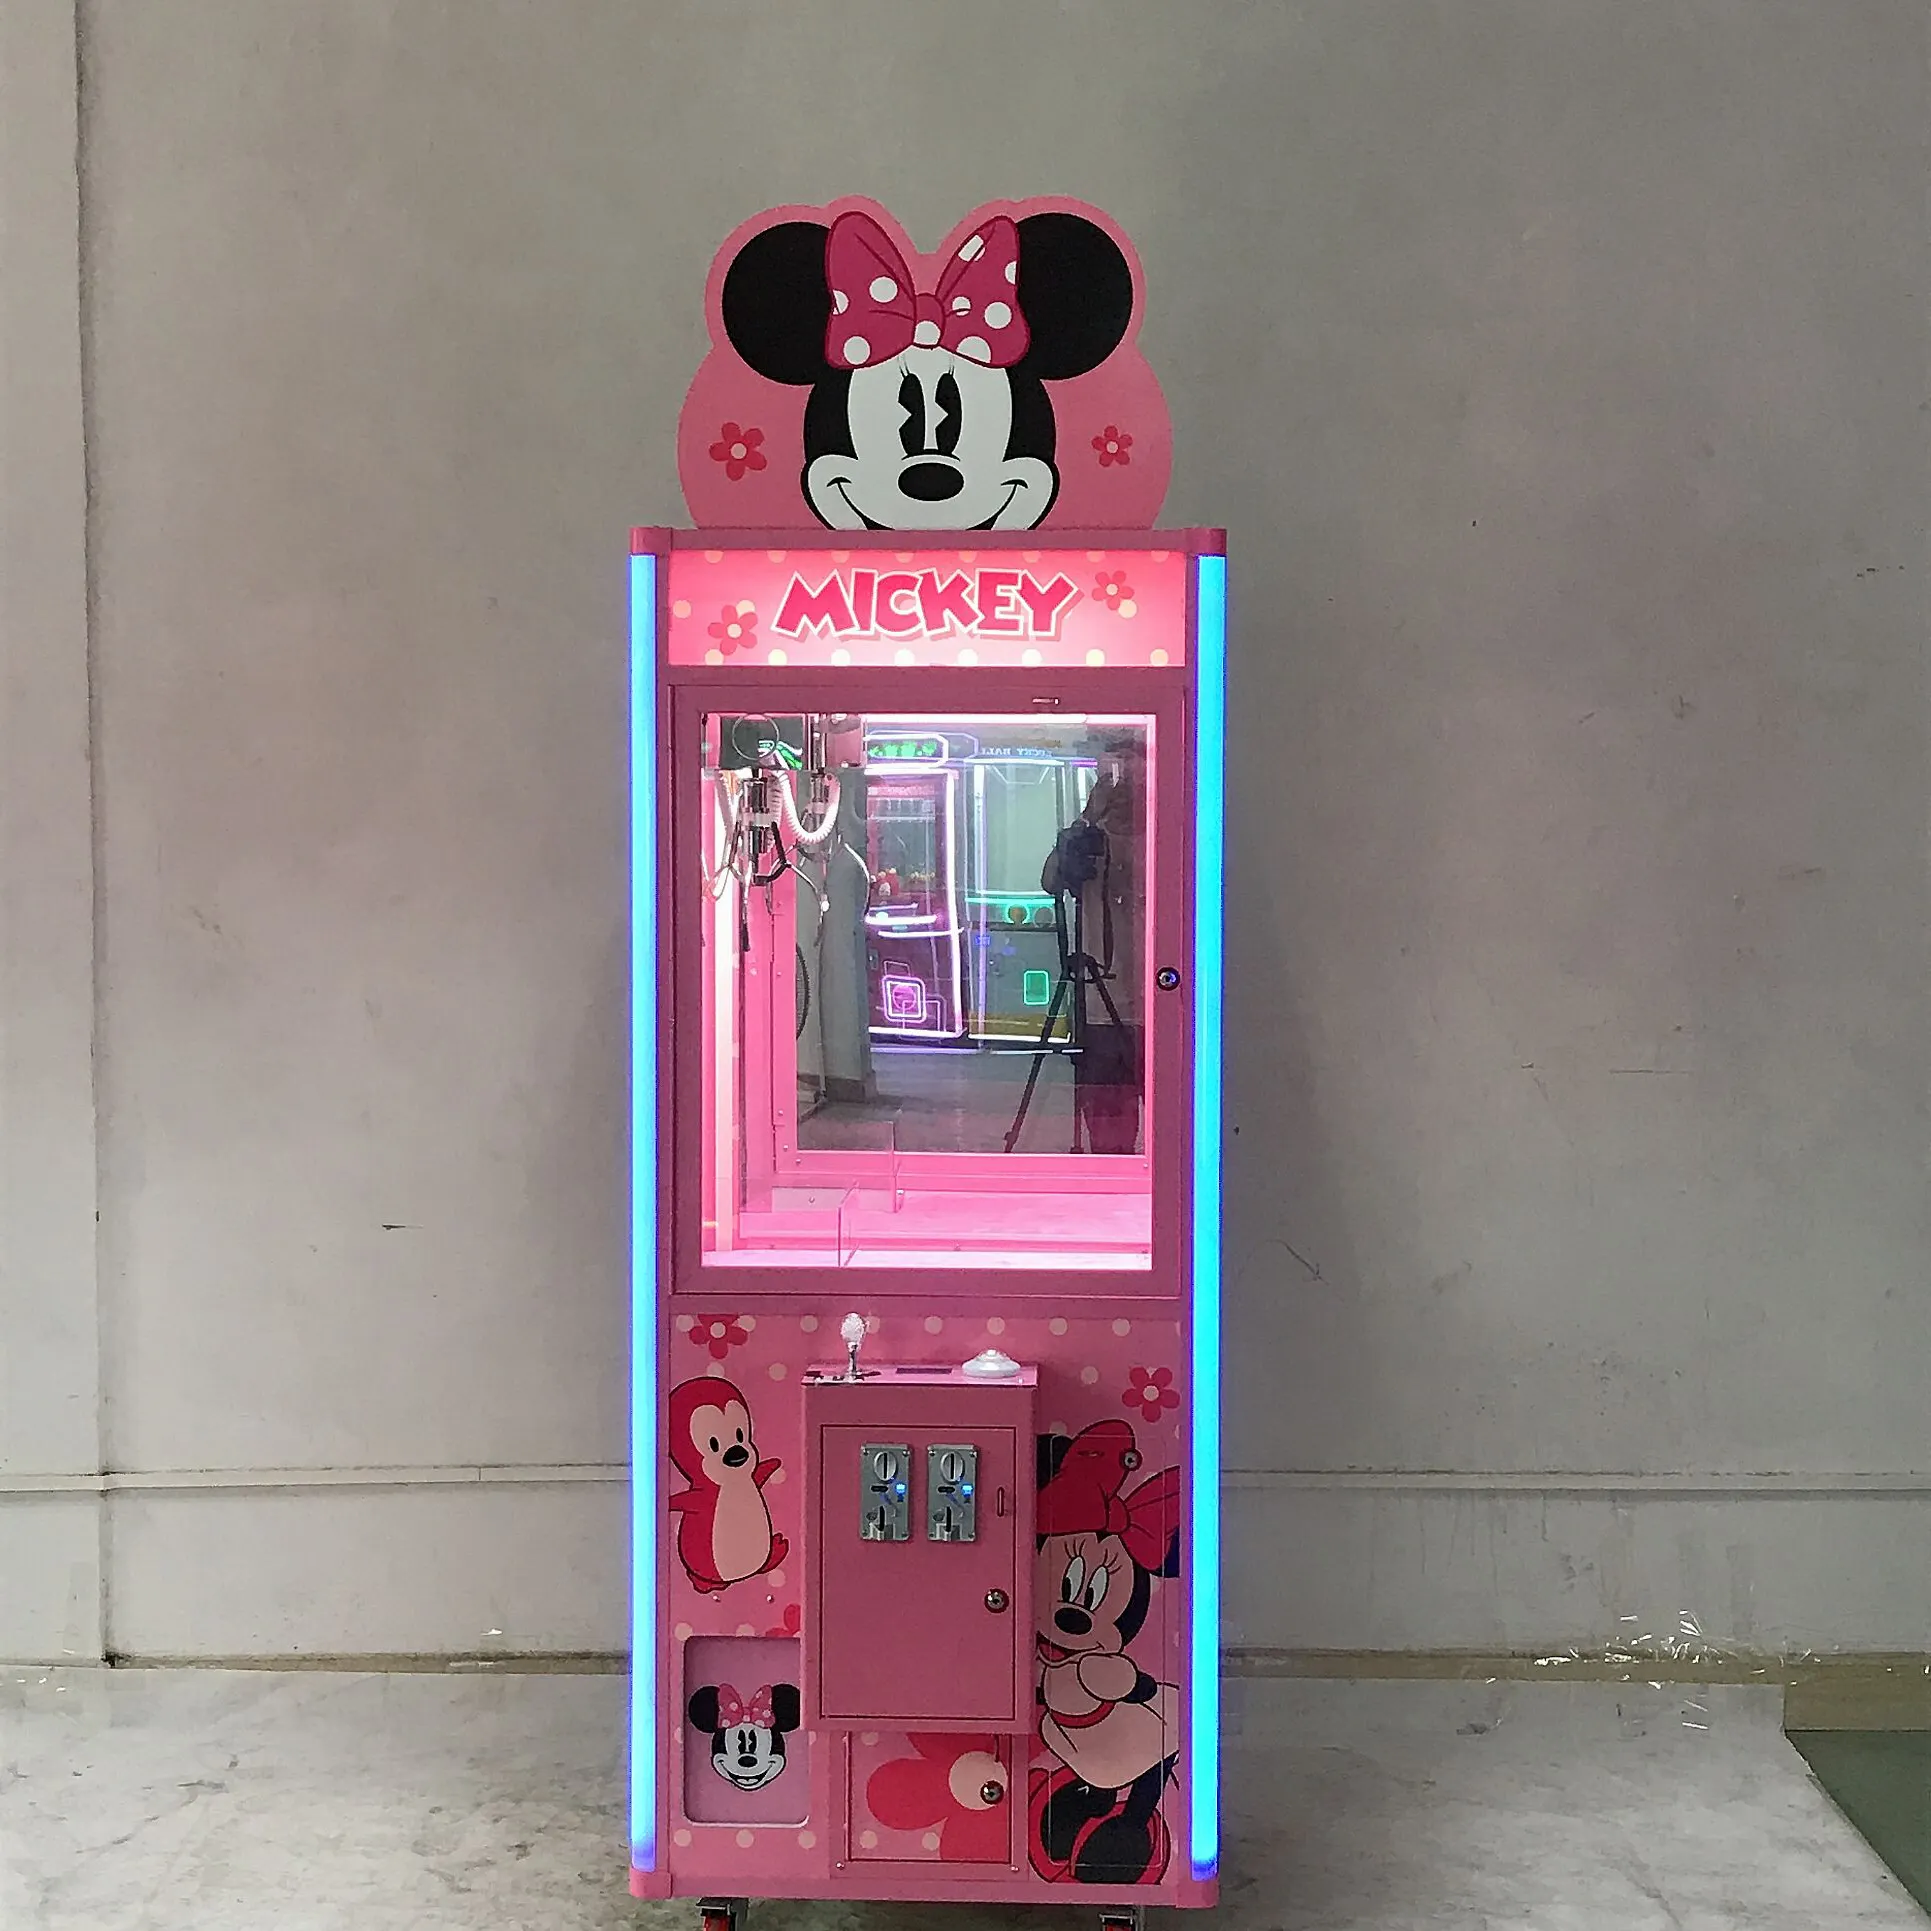 Customized claw crane vending machine toy games with coin operated